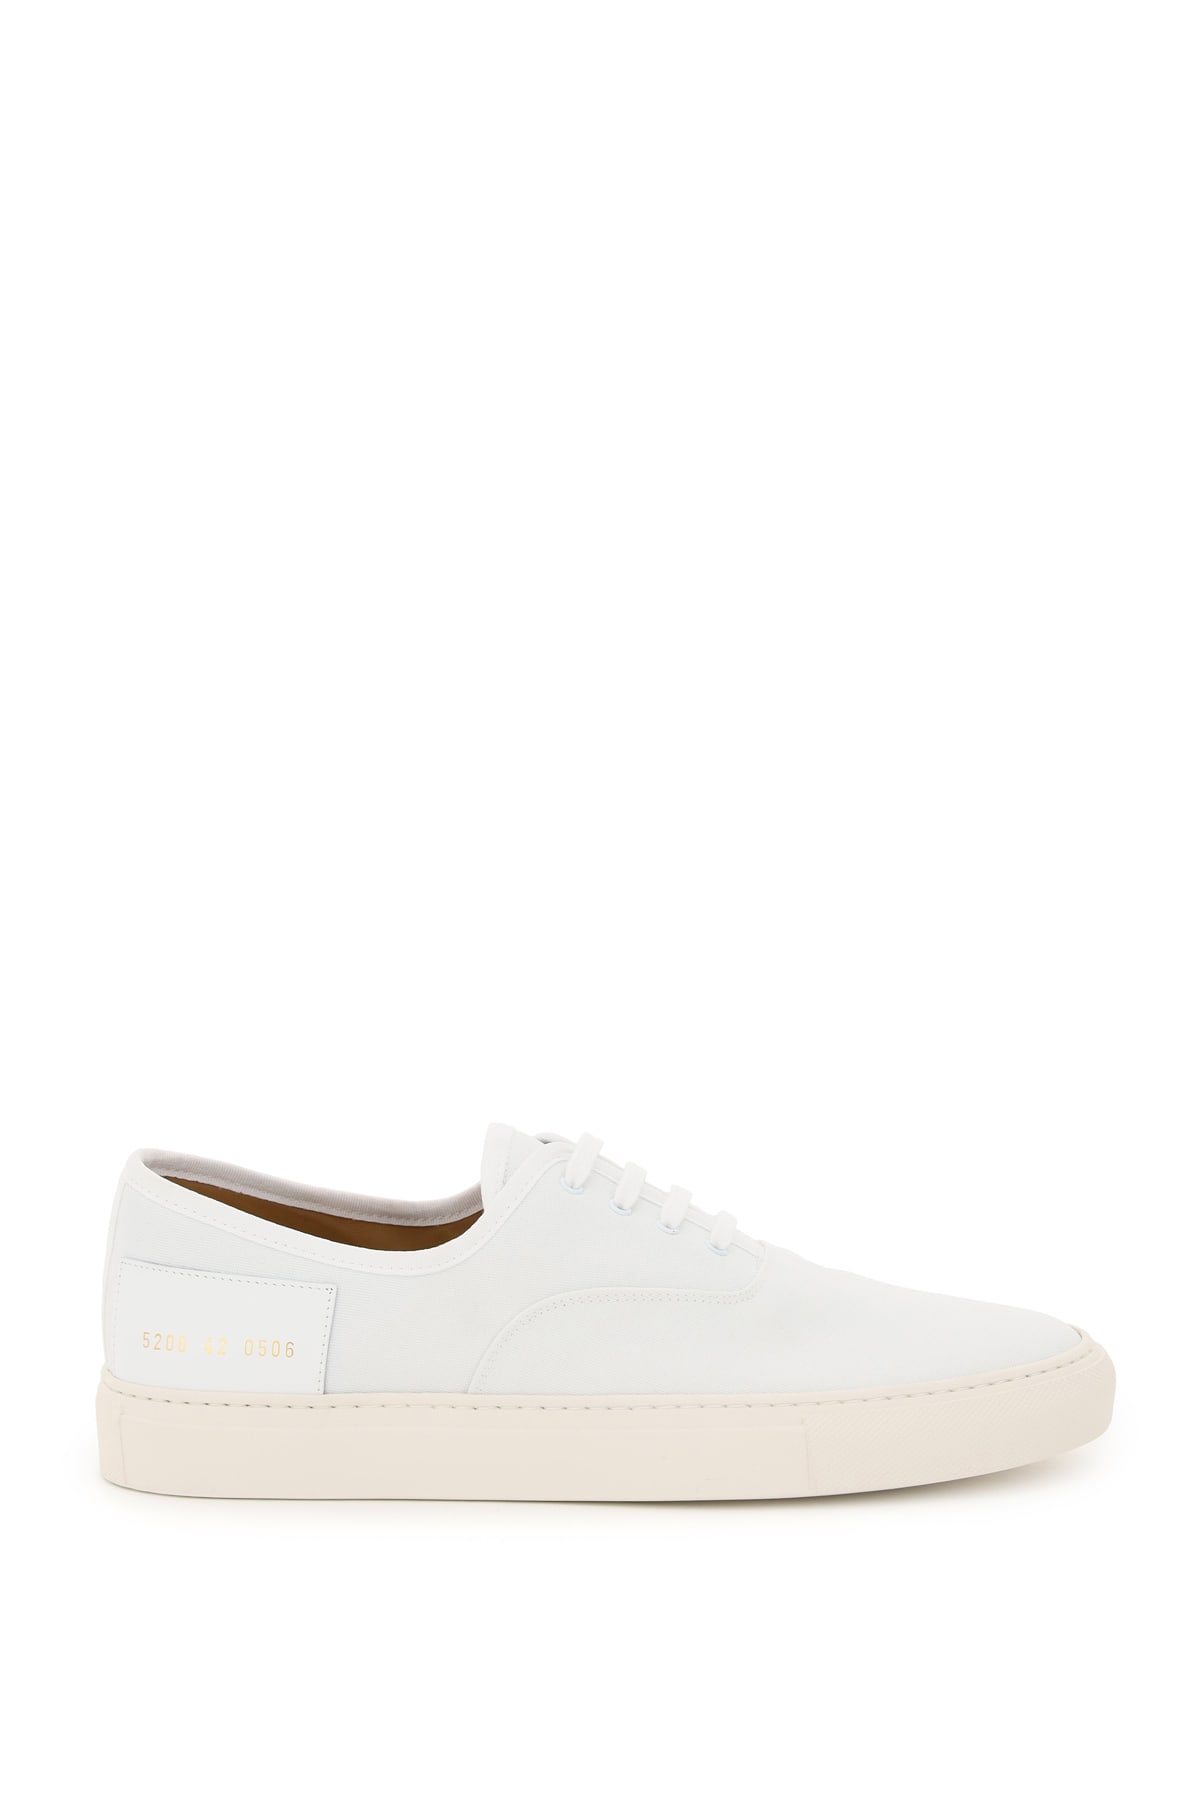 Common Projects Four Hole Canvas Sneakers